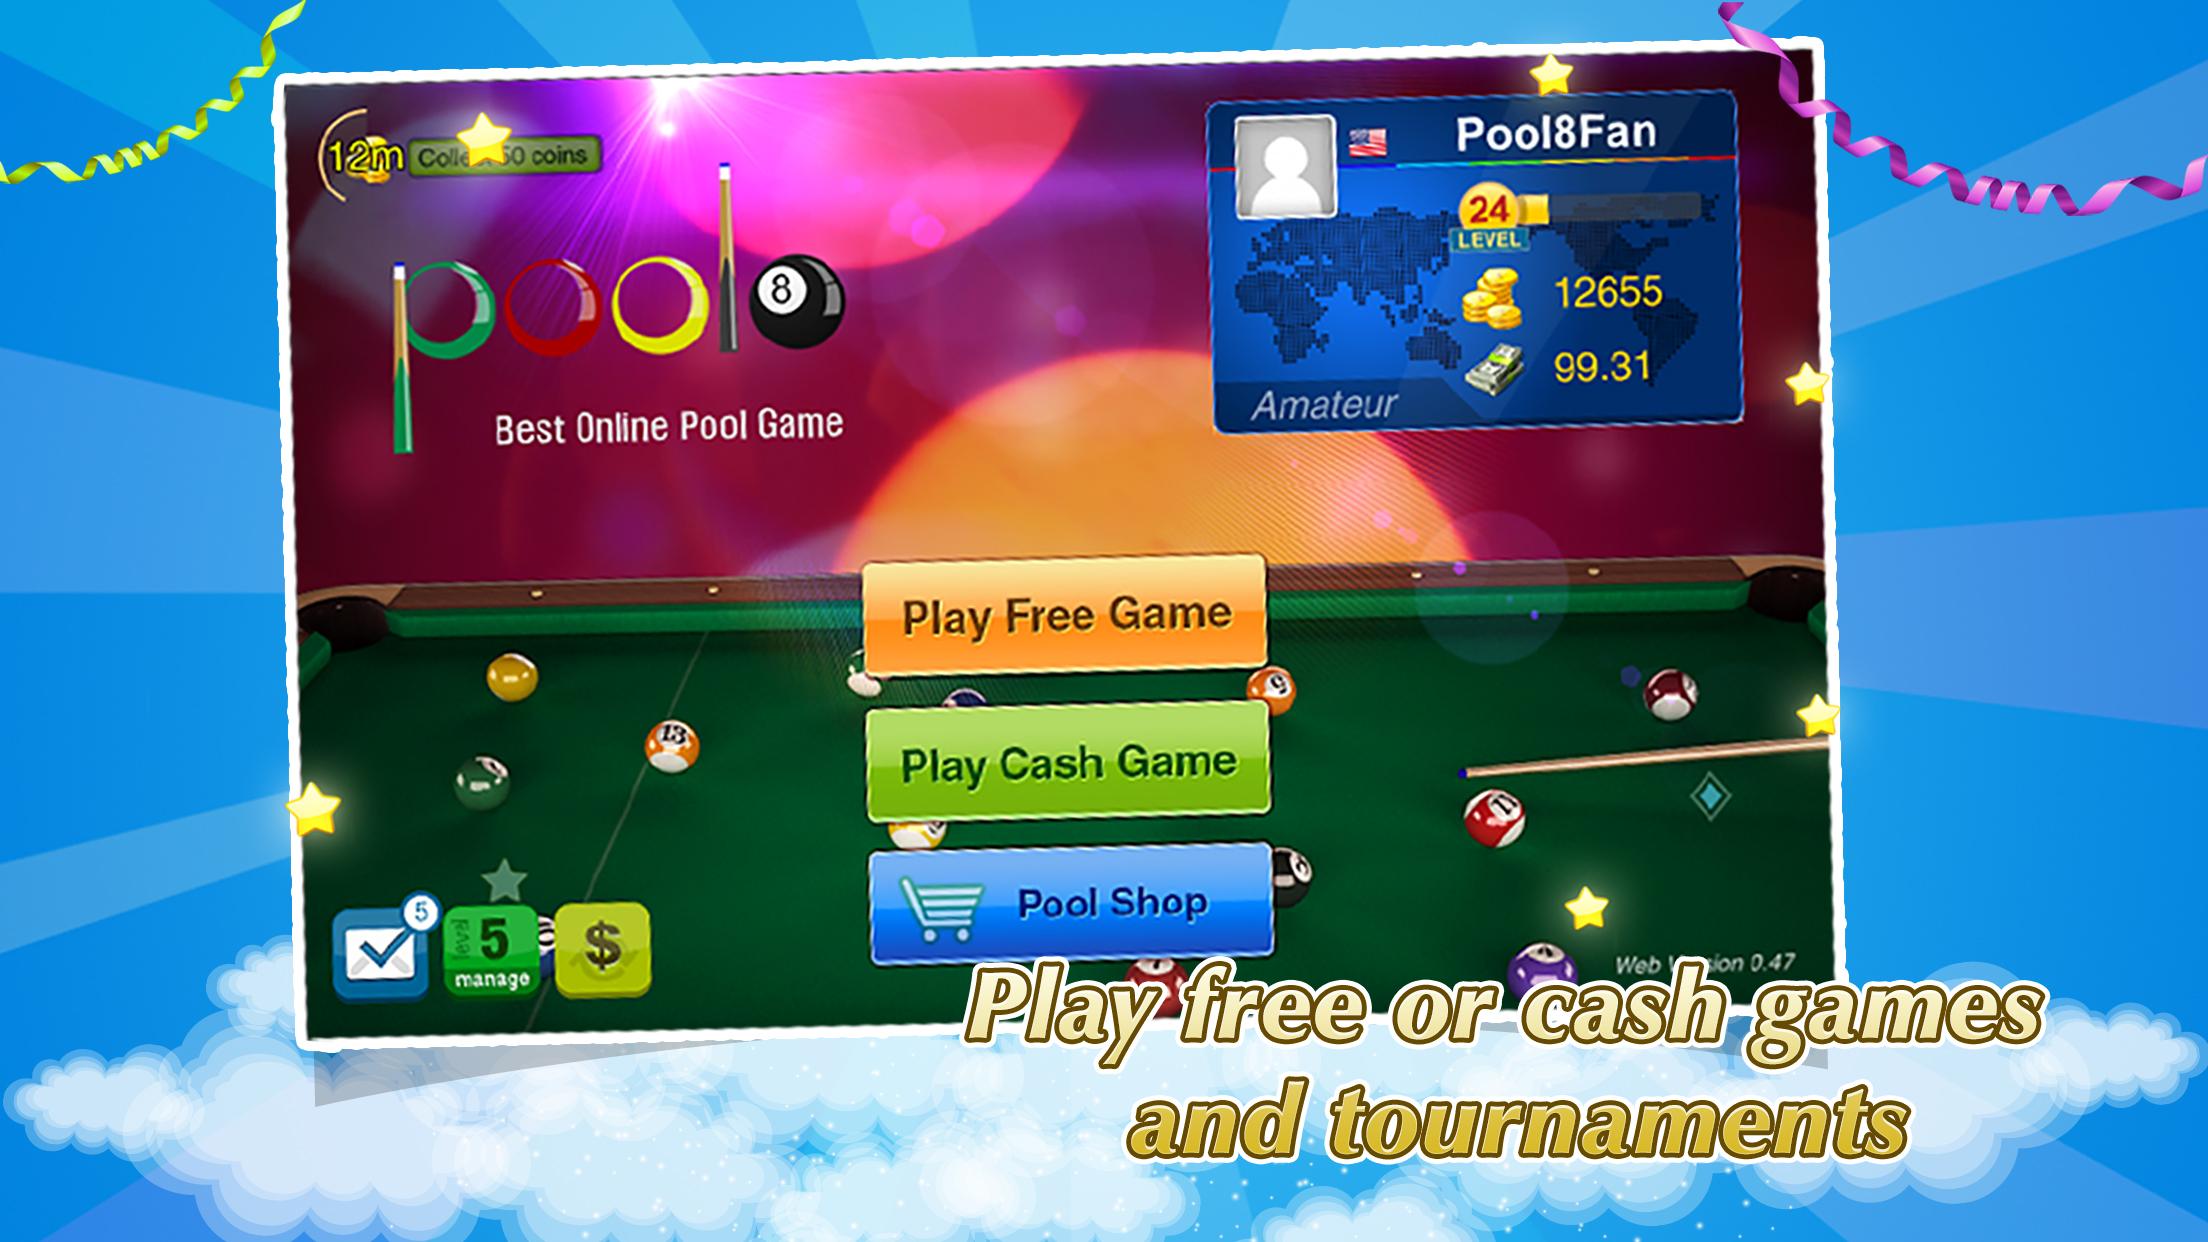 8 Ball Pool For Cash for Android - APK Download - 